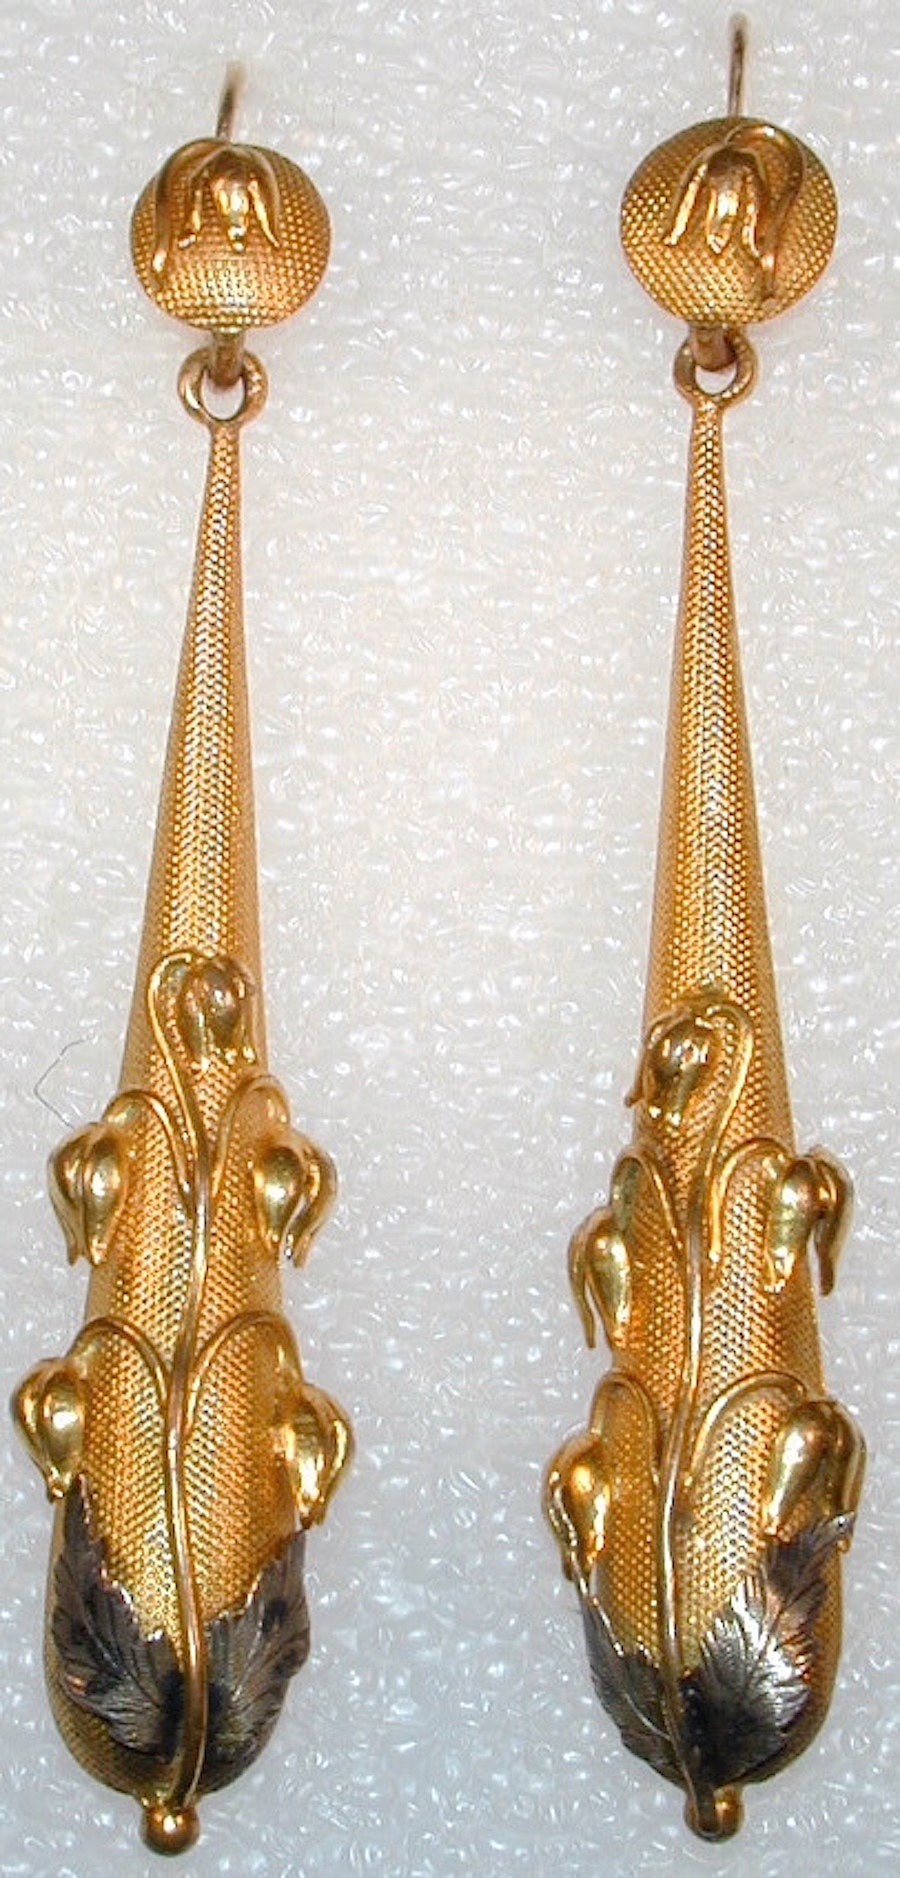 Elegant Georgian pinchbeck long drop earrings in a floral design enhanced by silver leaves. Pinchbeck is an alloy developed by Christopher Pinchbeck in 1720 to simulate gold. His alloy of copper and zinc looks like gold and does not tarnish. The